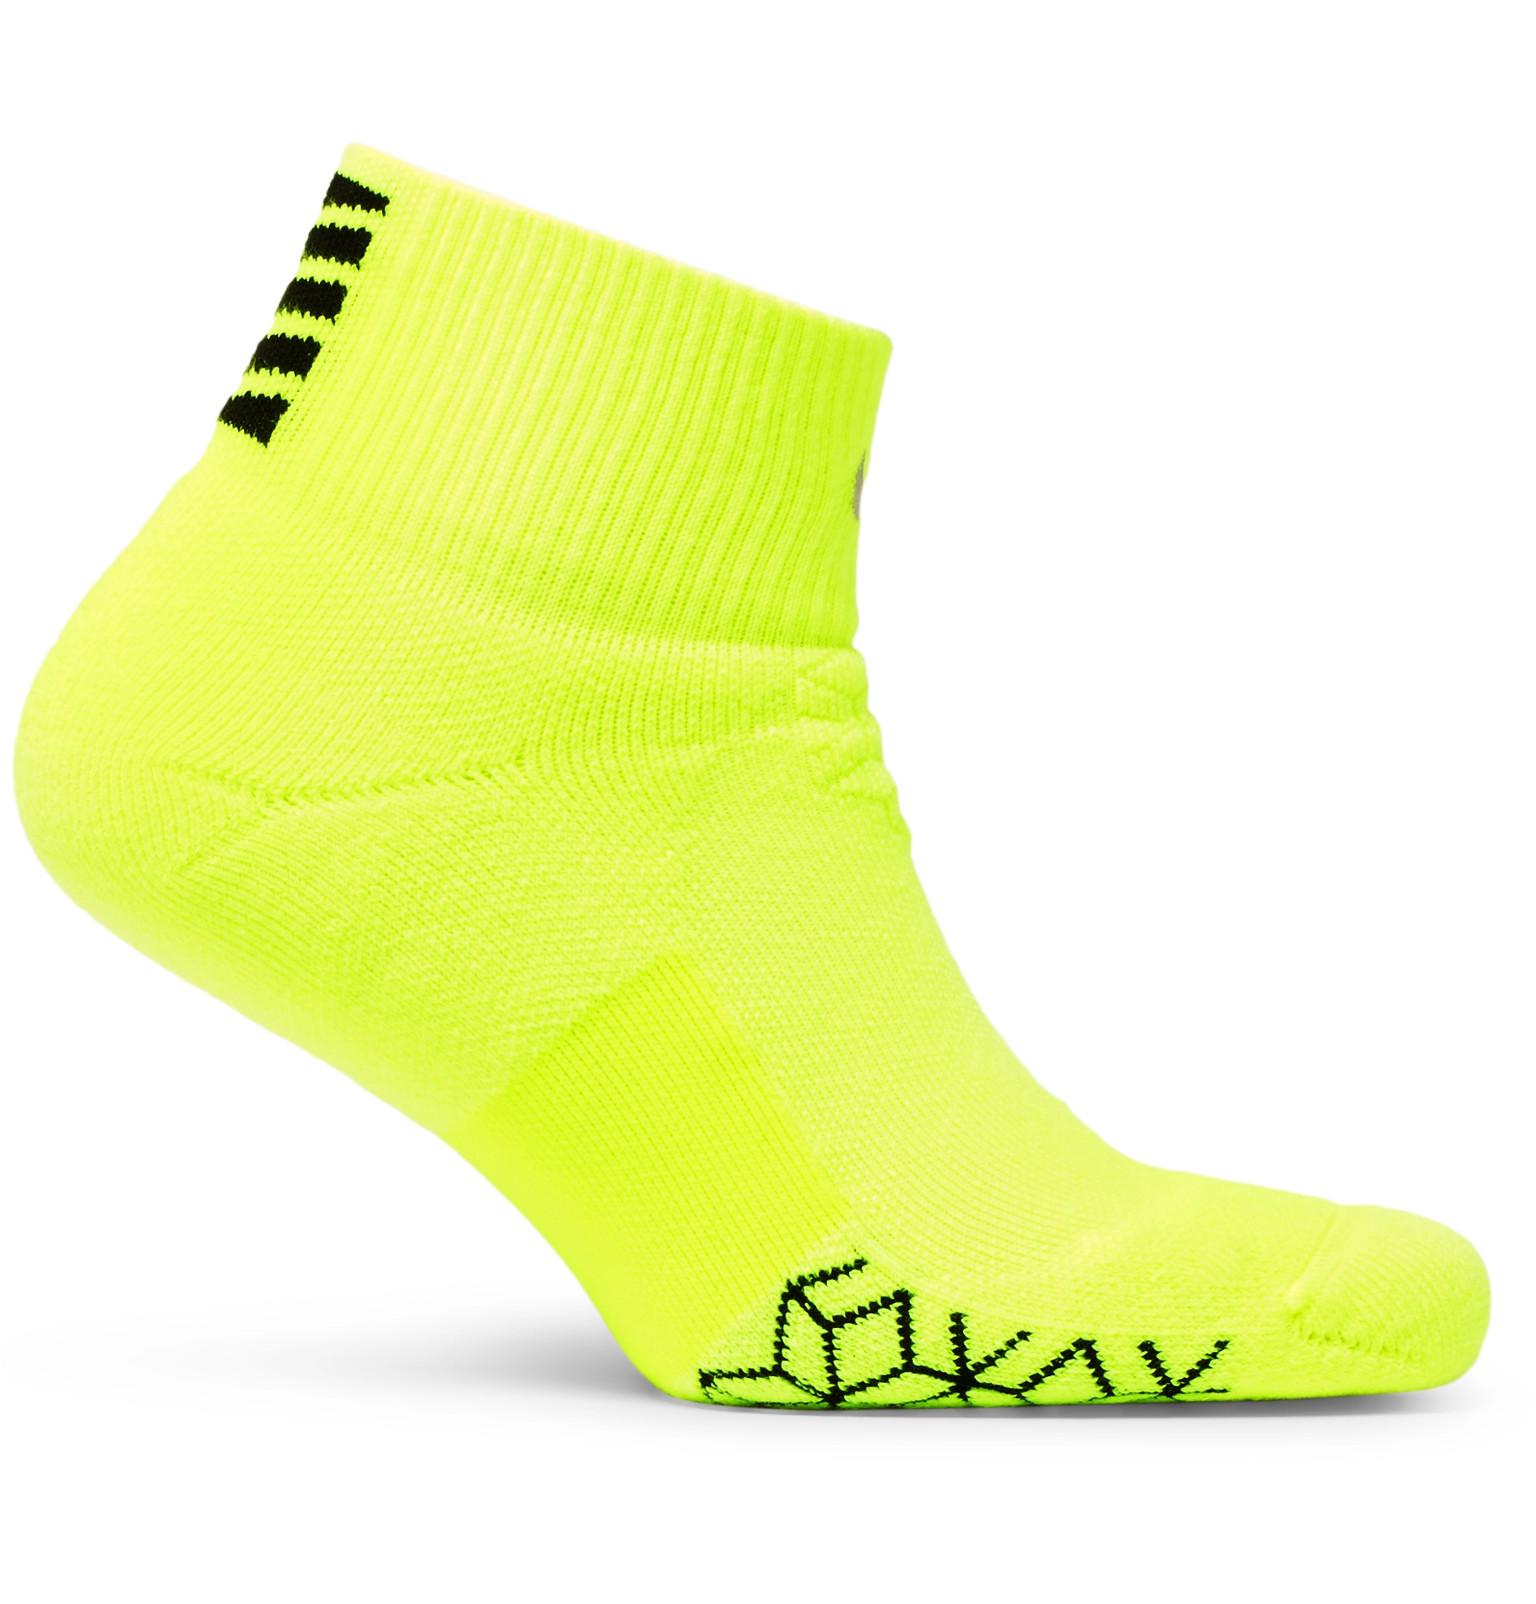 Nike Synthetic Elite Dri-fit Socks in Bright Yellow (Yellow) for Men - Lyst